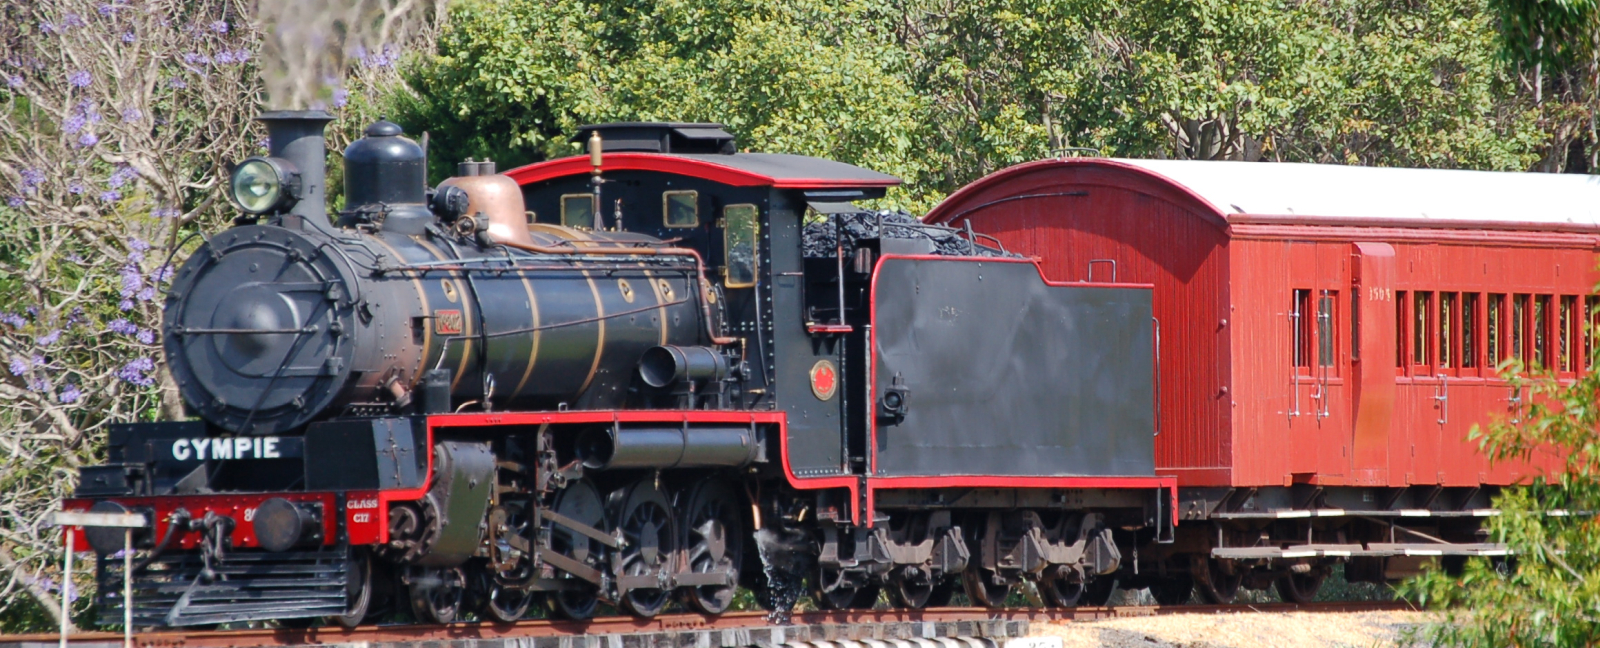 No. 802 in September 2006 on the “Mary Valley Rattler” heritage railway